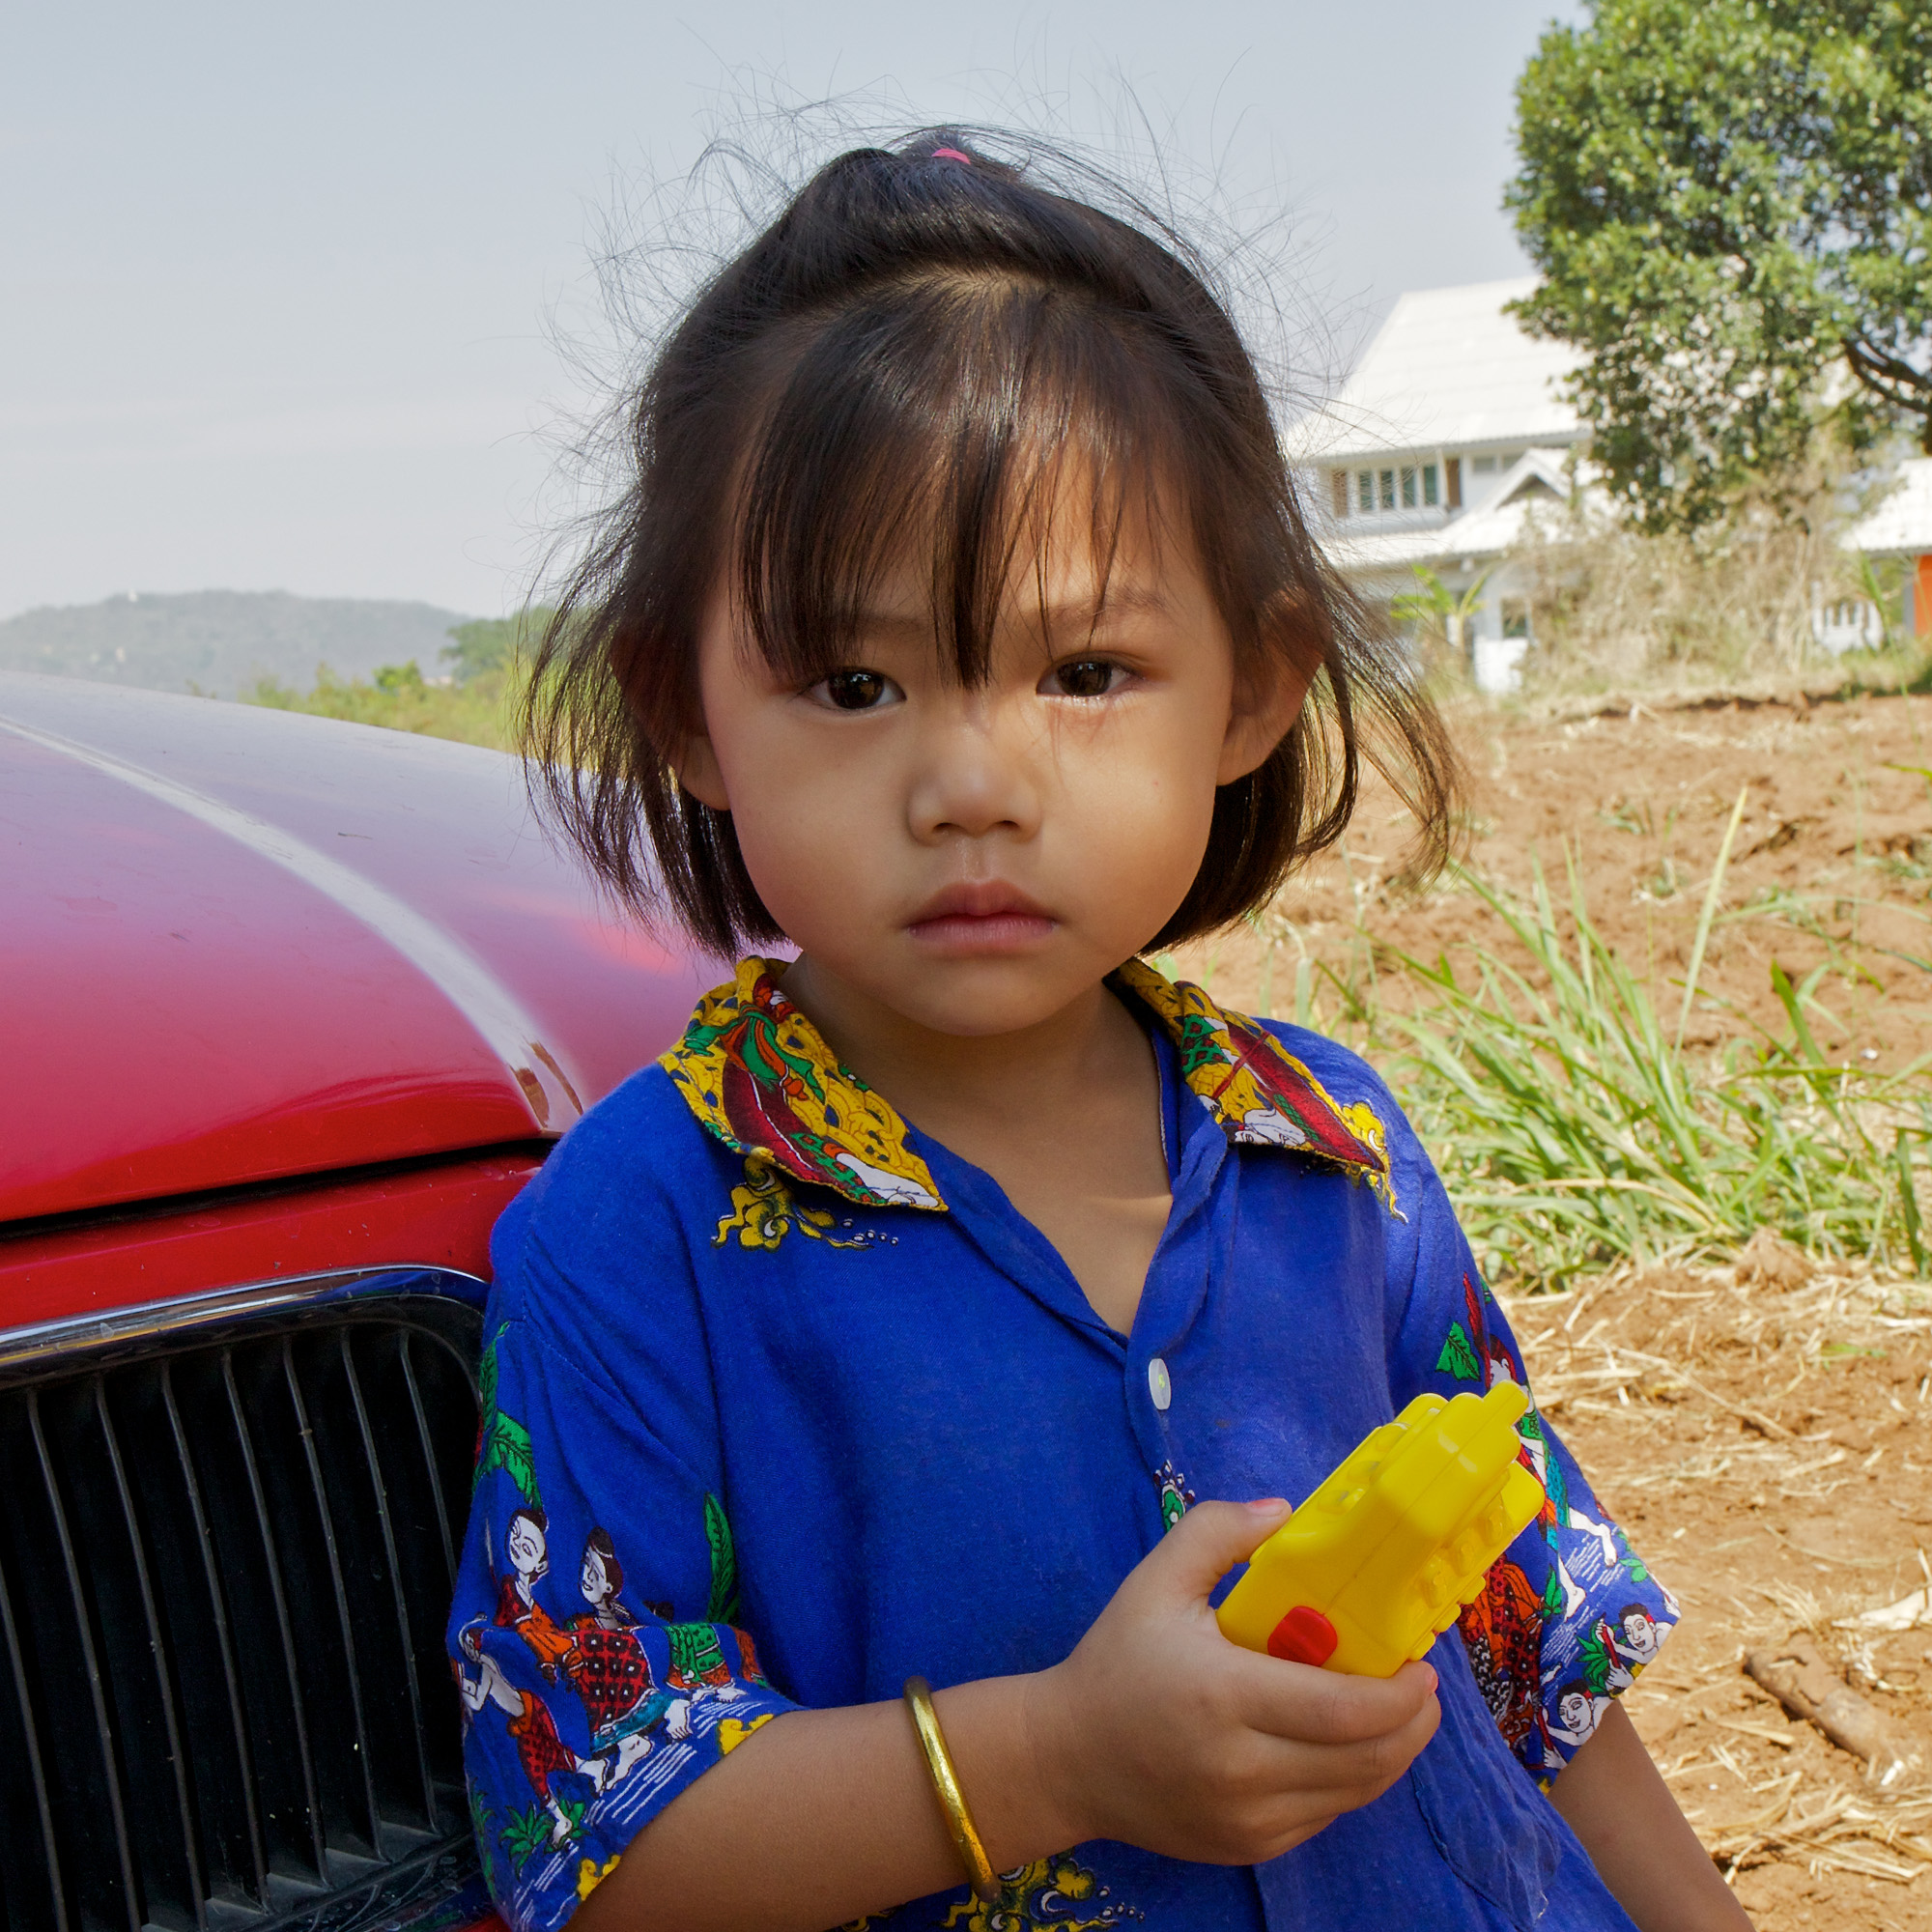 little girl in blue dress, with yellow toy, in front of red car